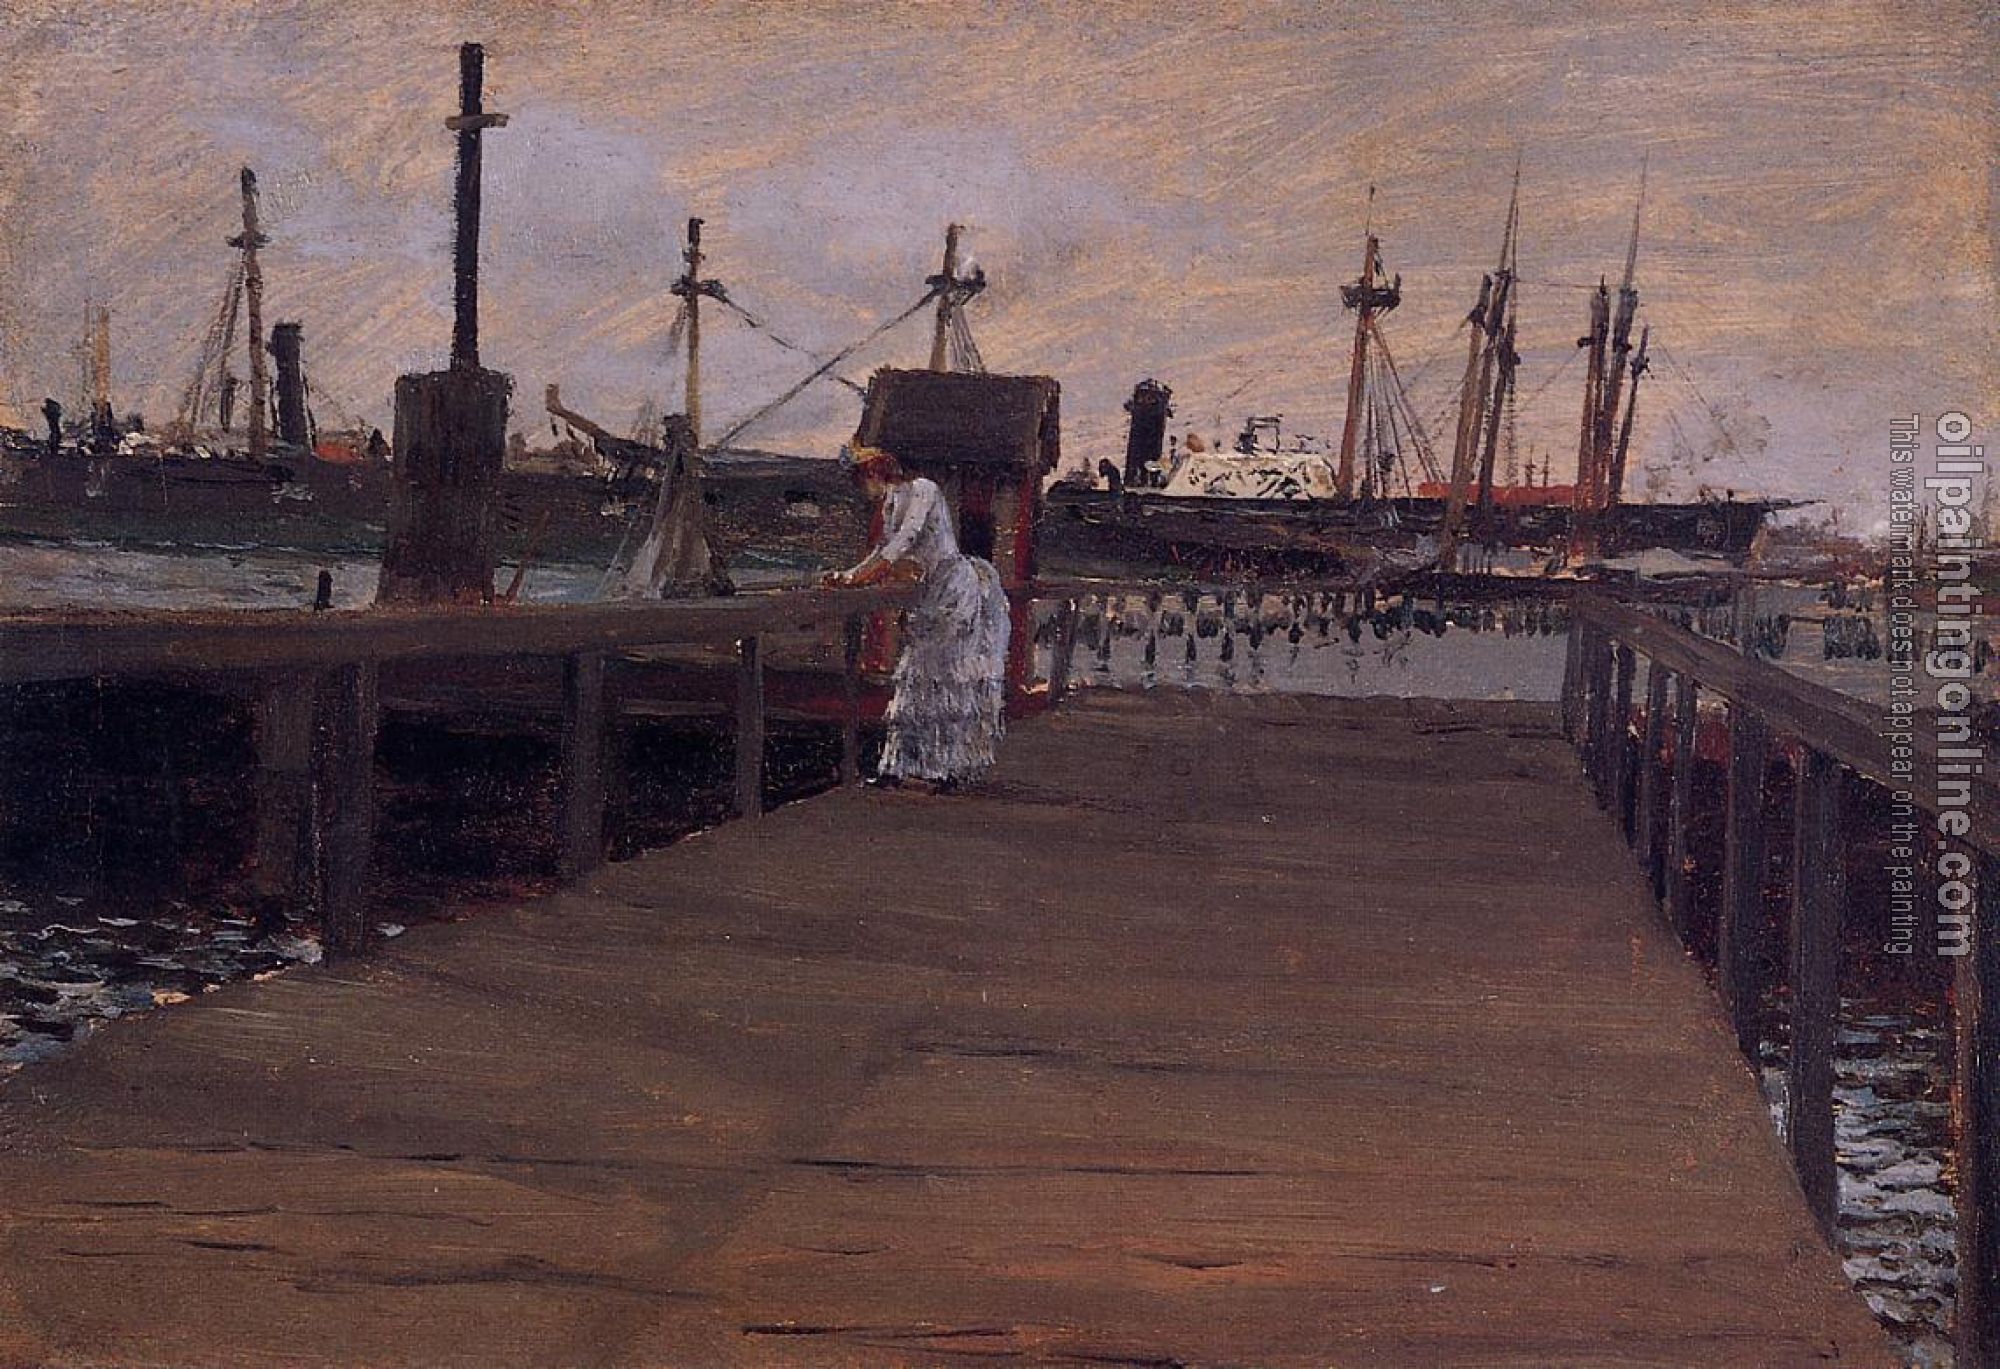 Chase, William Merritt - Woman on a Dock